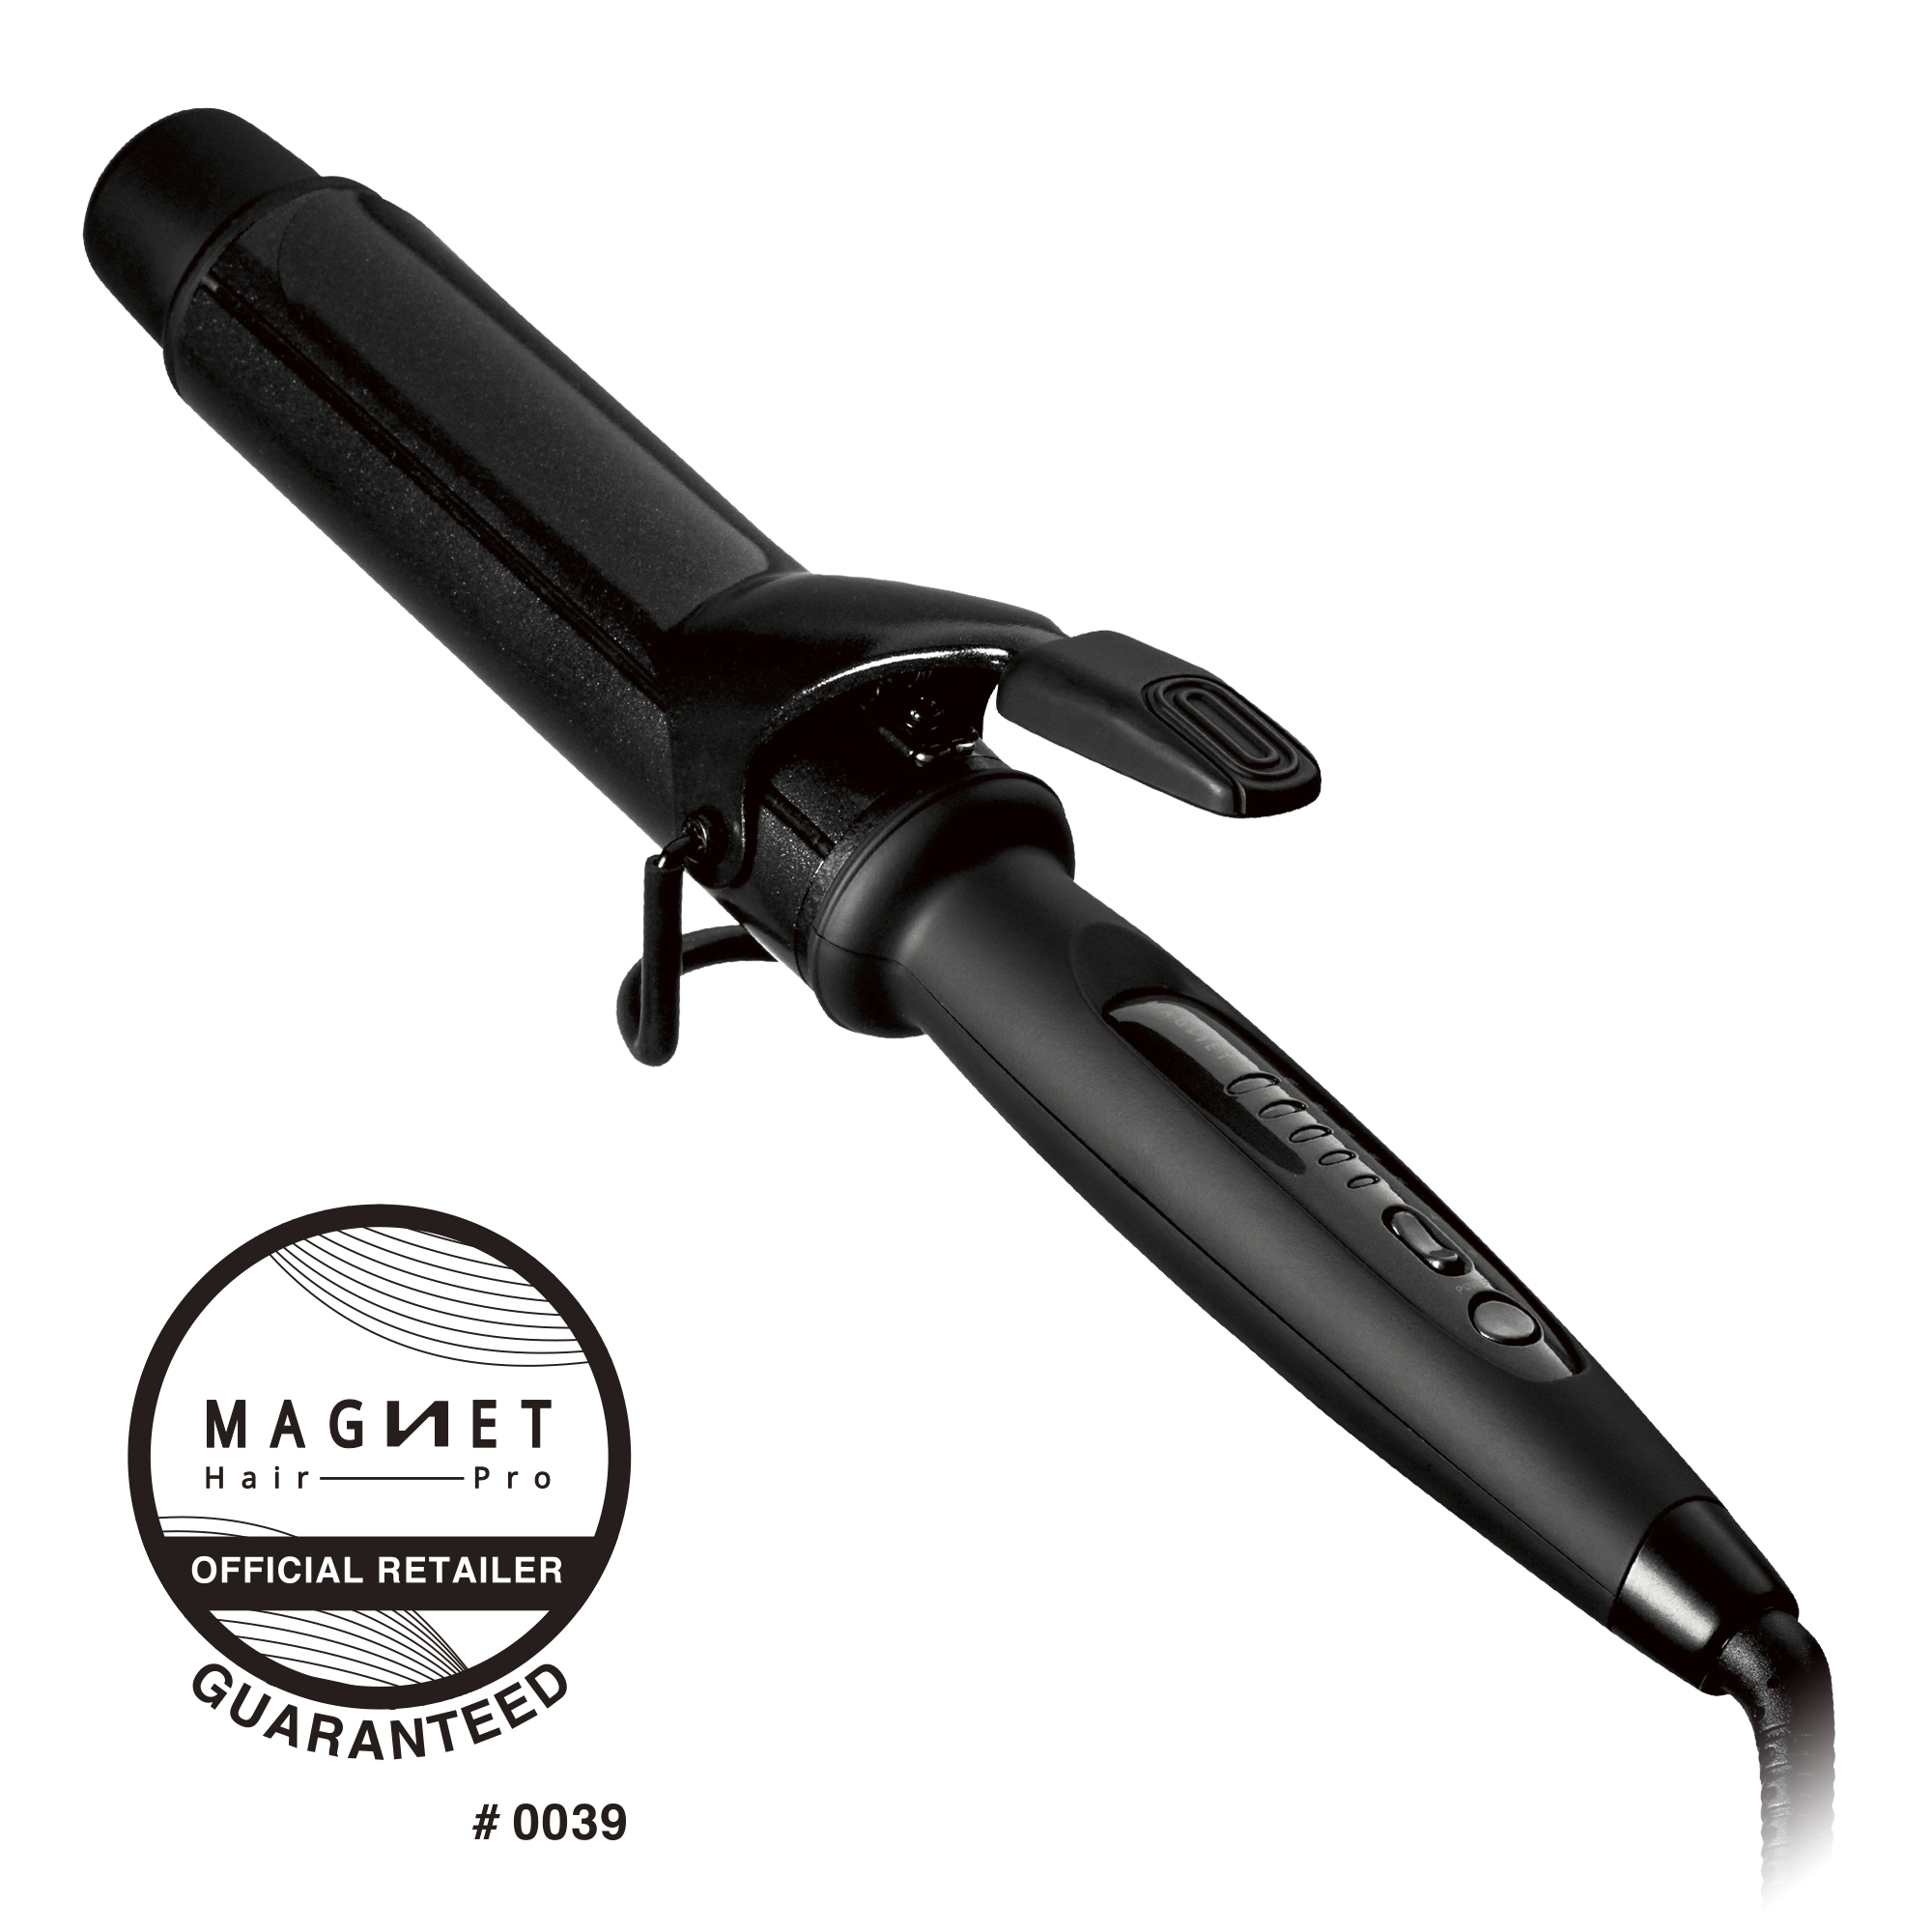 HOLISTIC cures MAGNETHairPro CURL IRON38mm